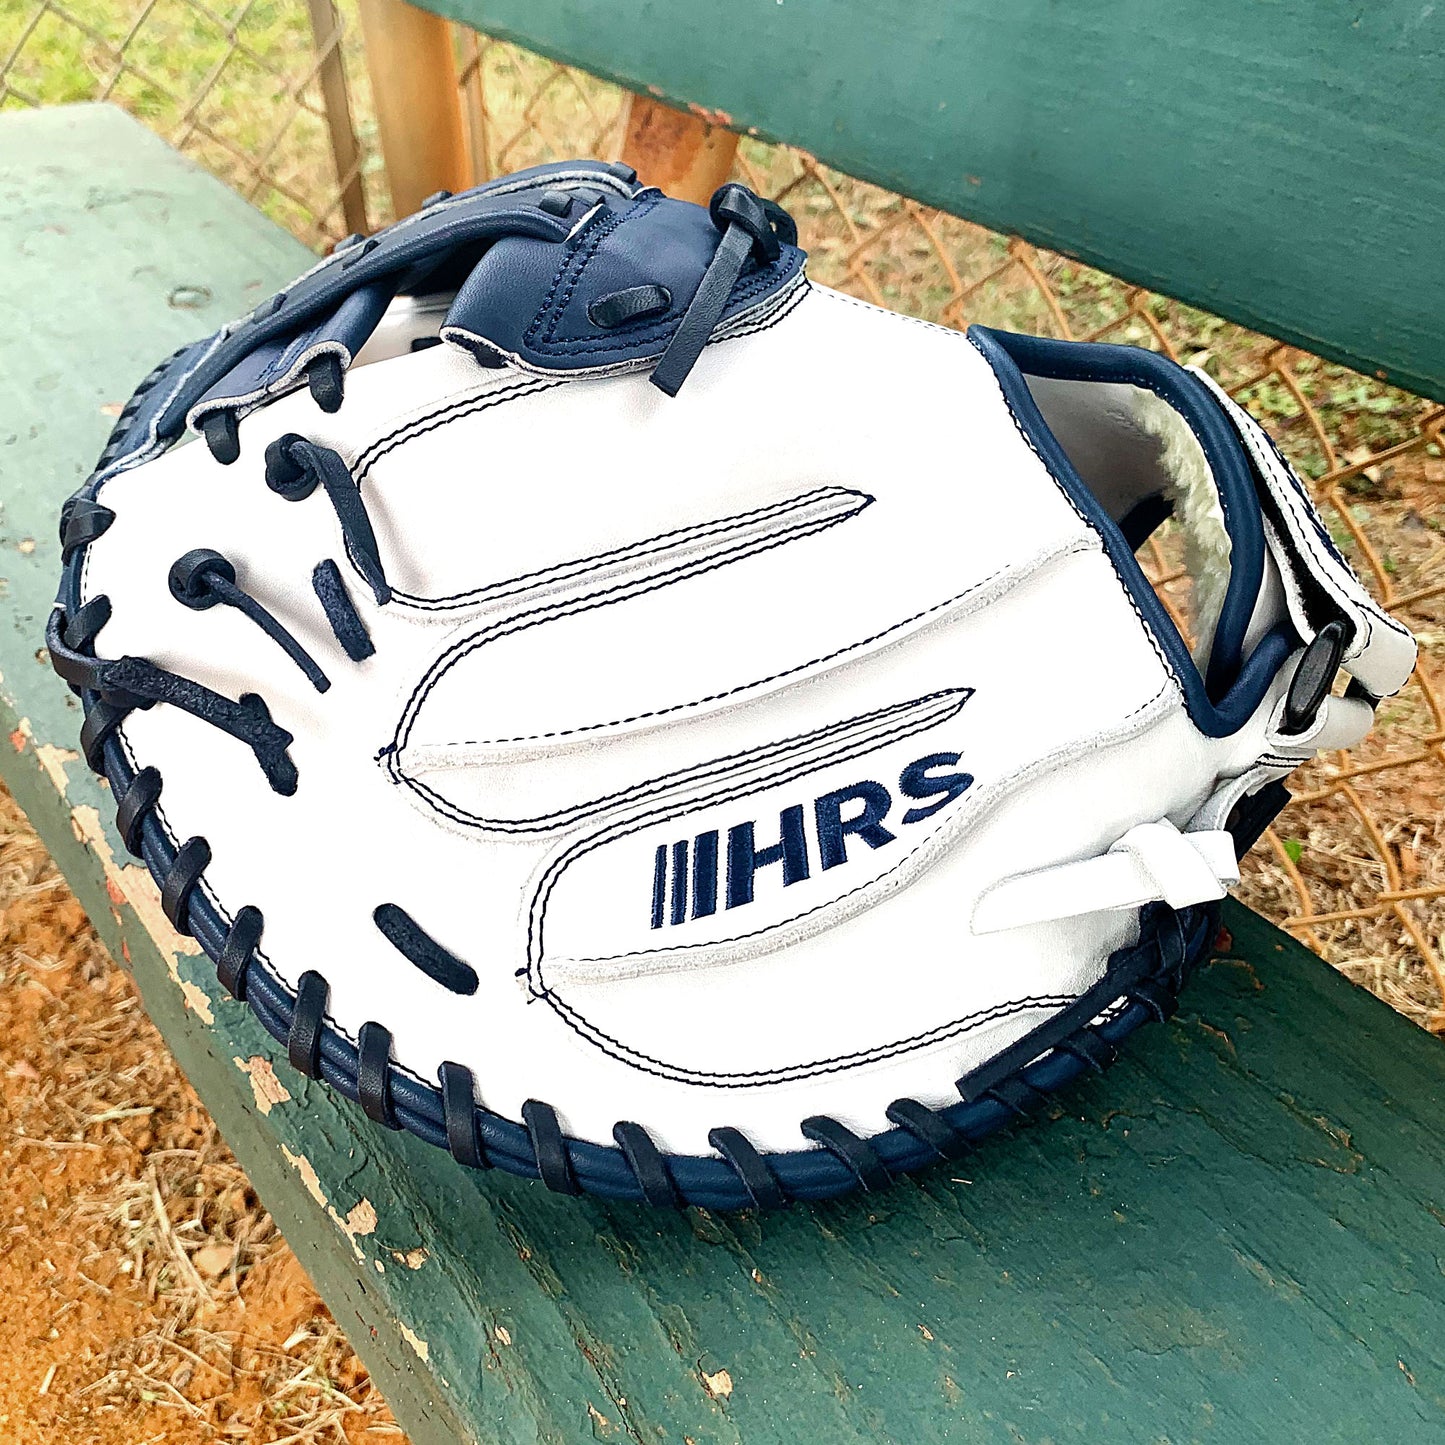 34" Softball Catcher's Mitt - White with Navy Laces